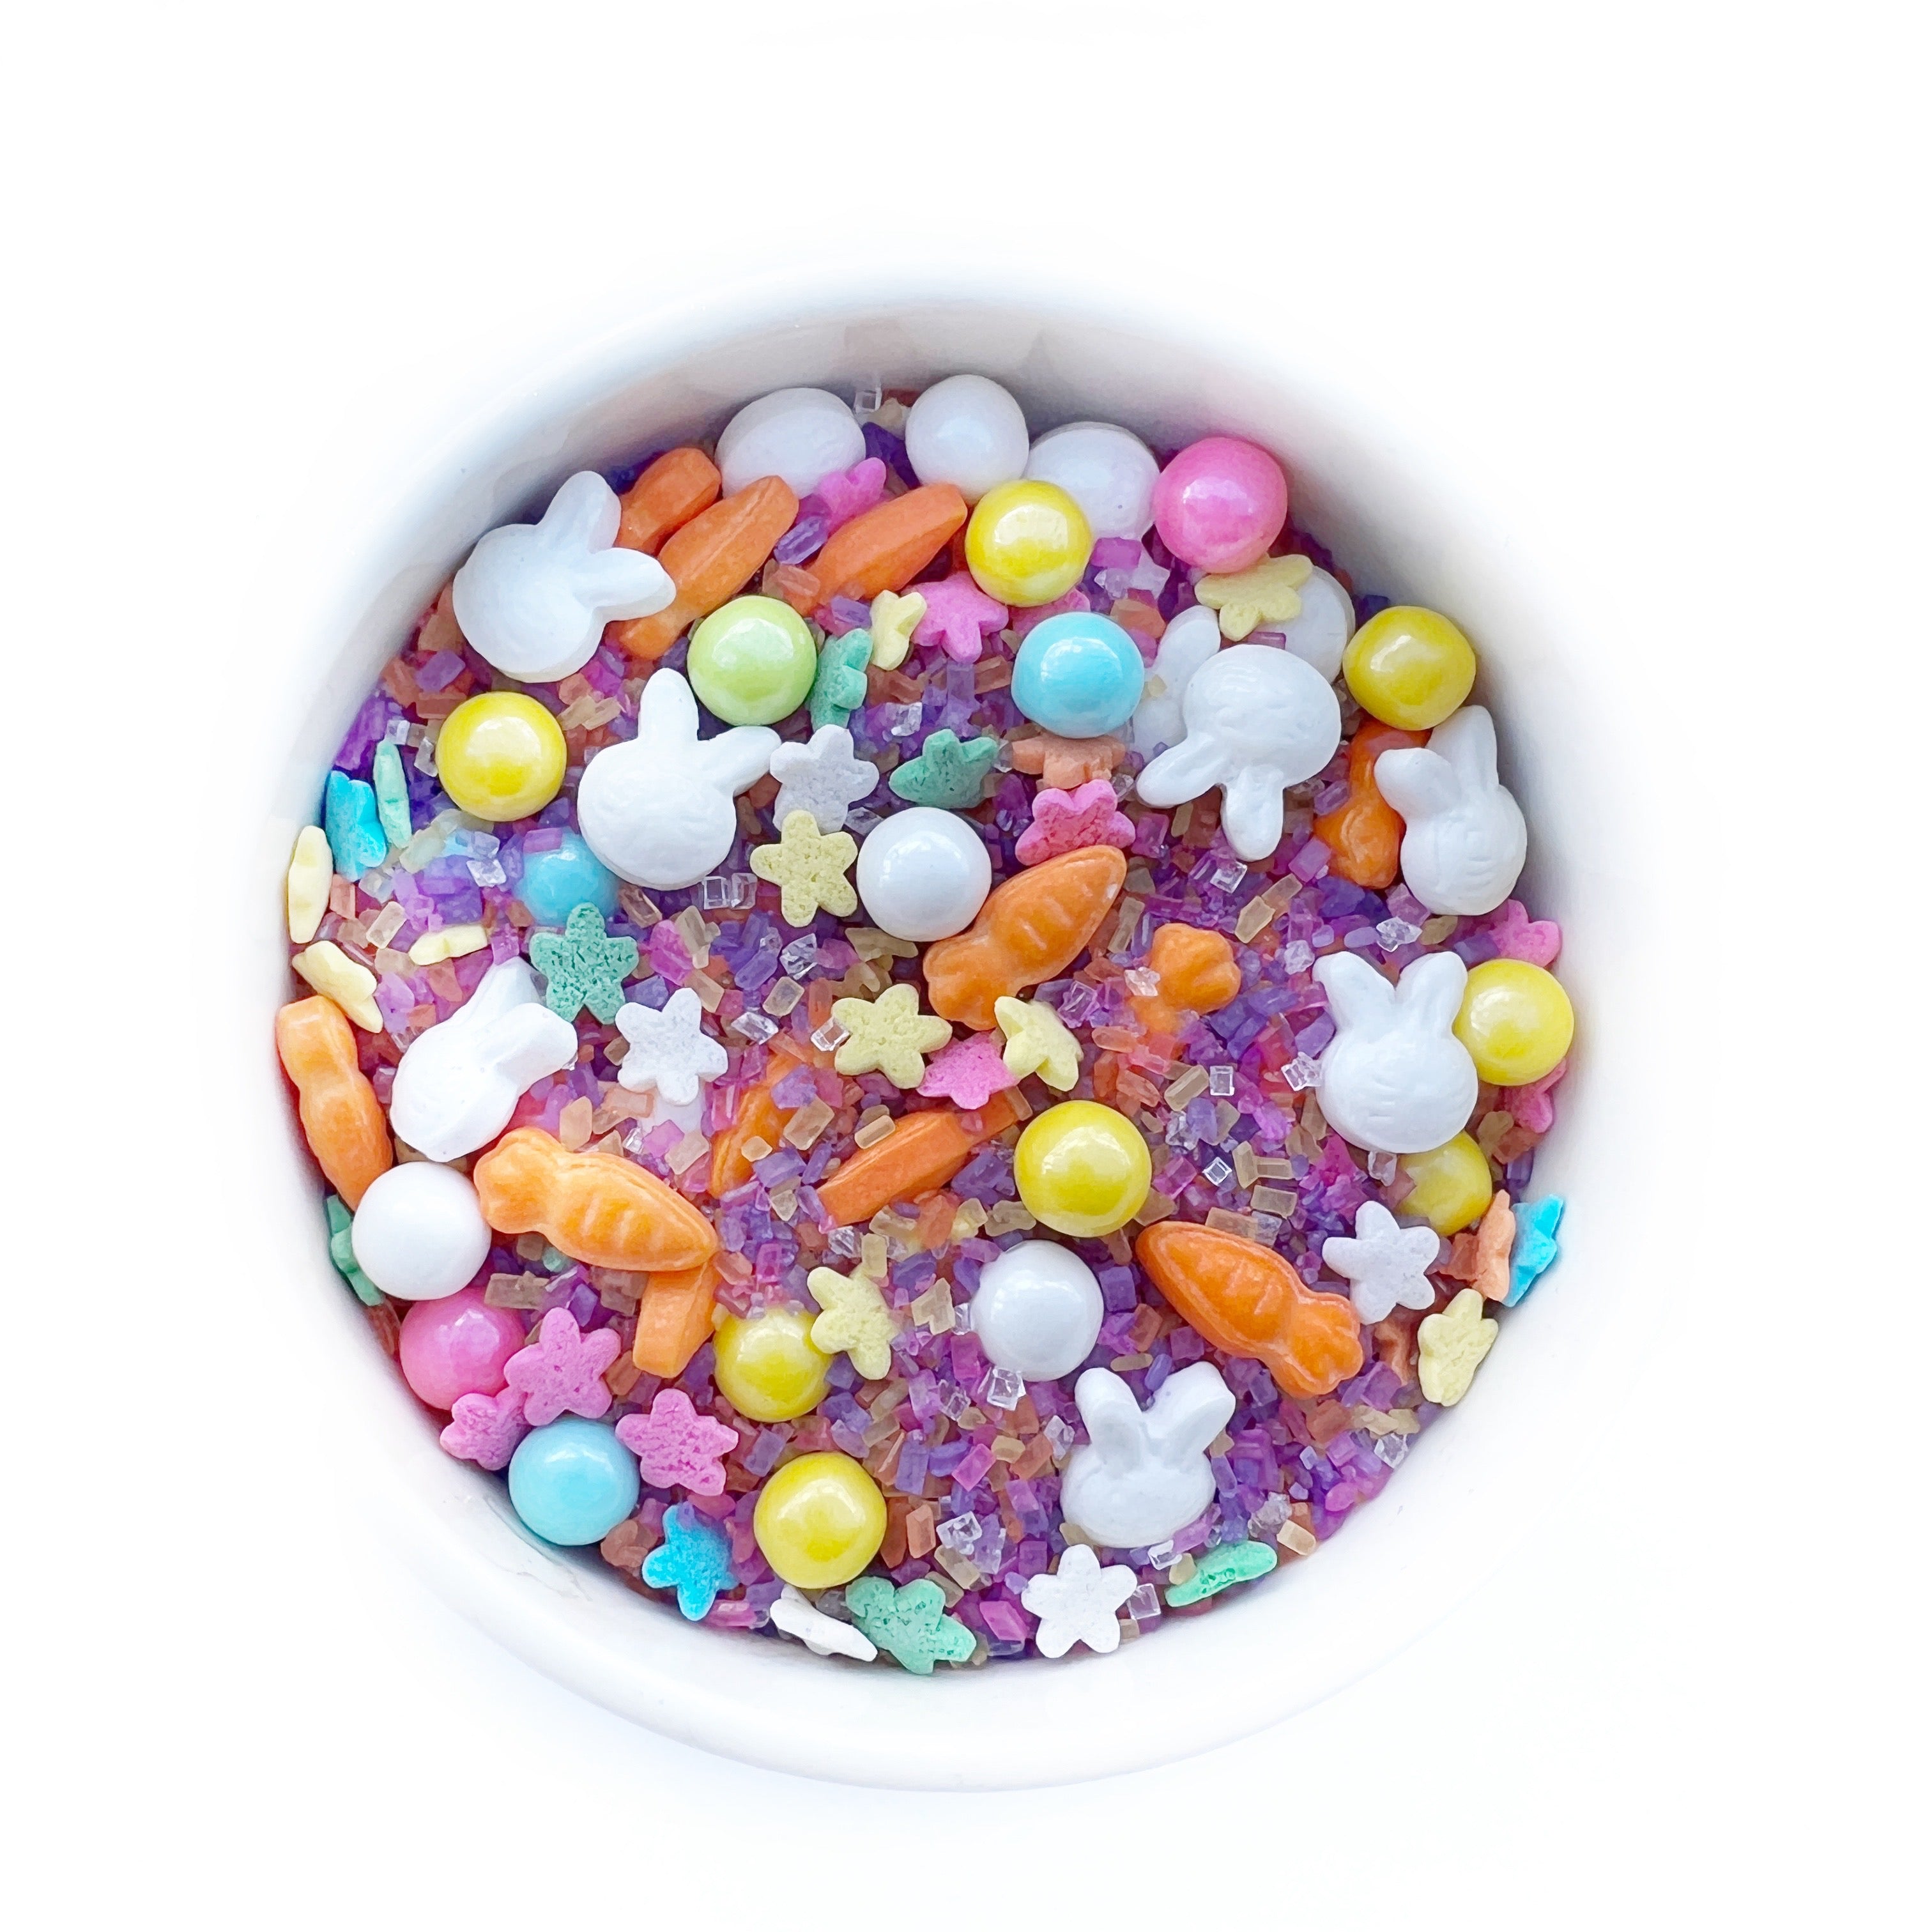 Spring Sprix, Seasonal Sprinkle Mix for Easter and St. Patrick's Day-Chocolate Bars-Eclipse Chocolate